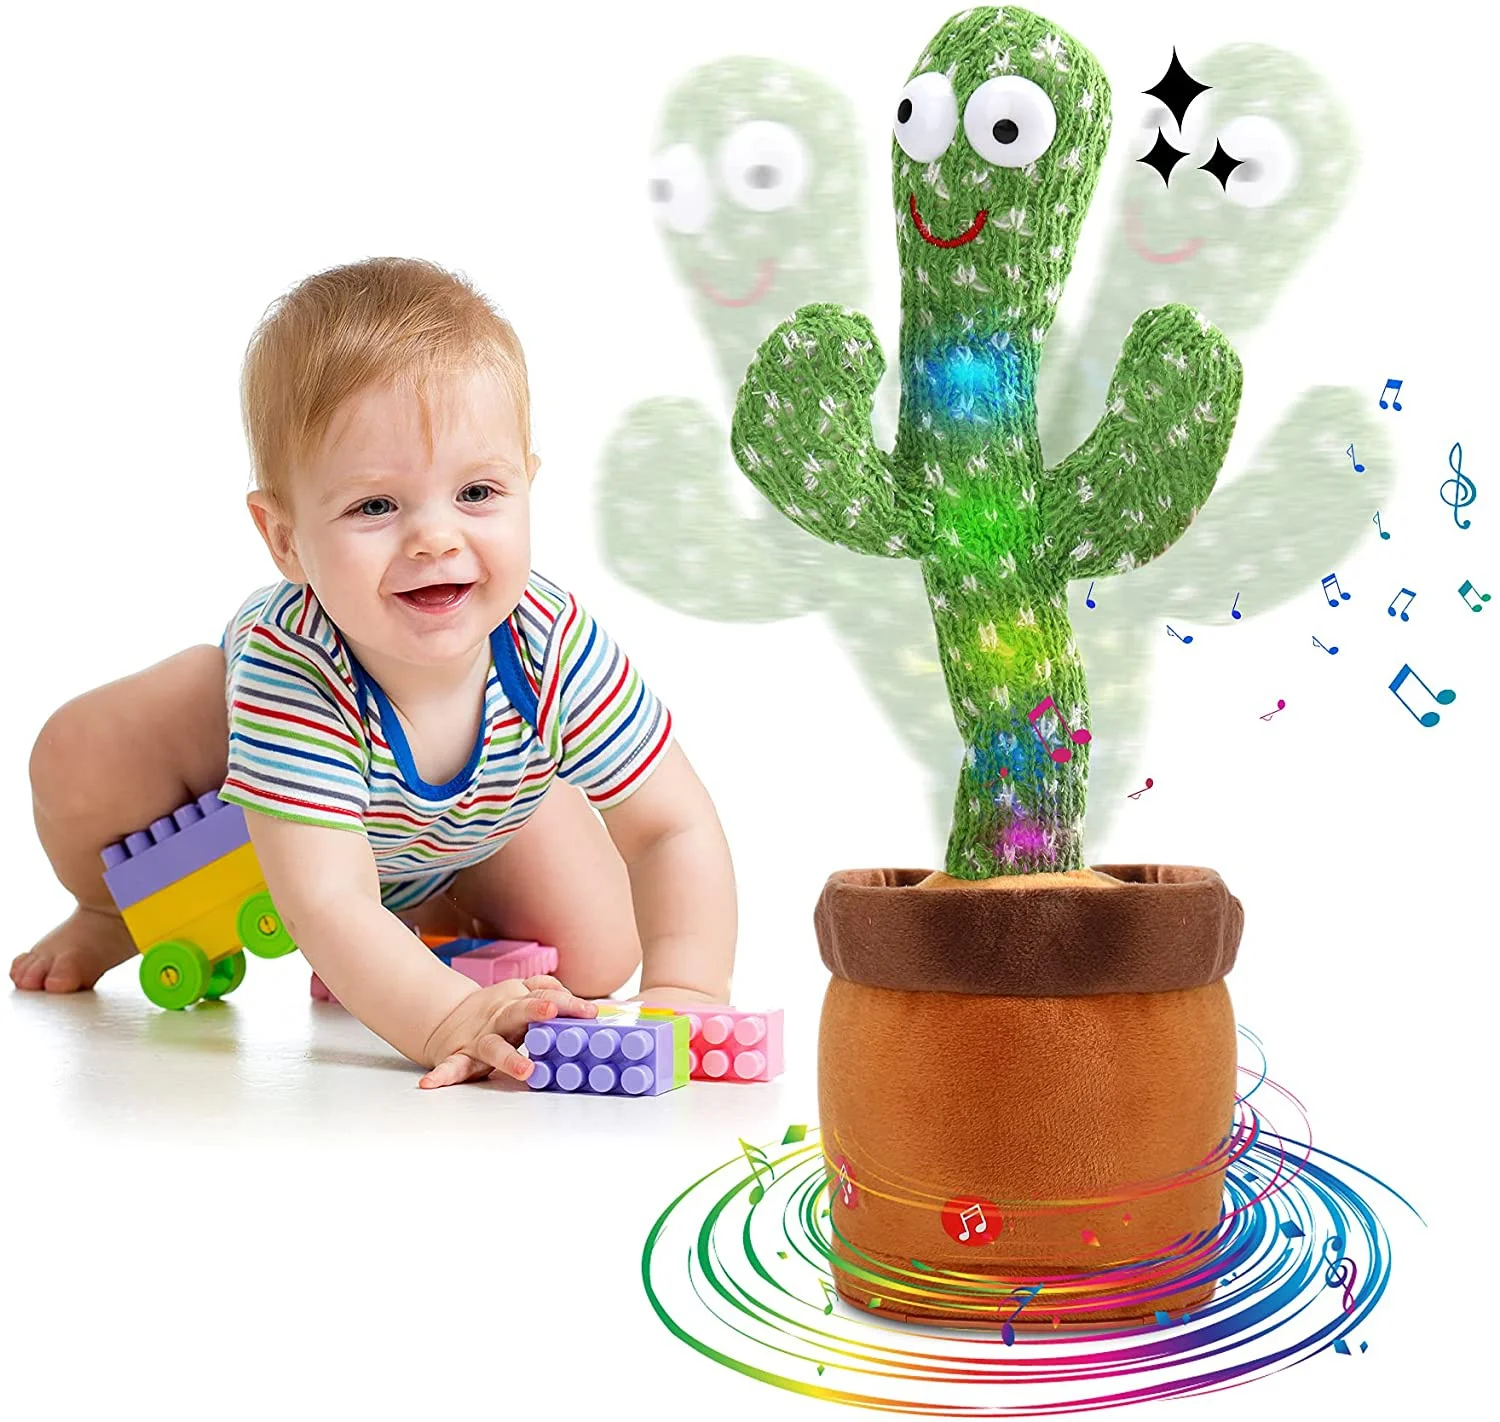 

Dancing Cactus Talking Cactus Toy,Wriggle Singing Cactus Repeats What You Say,Plush Talking Toy Electric Speaking Cactus Baby To